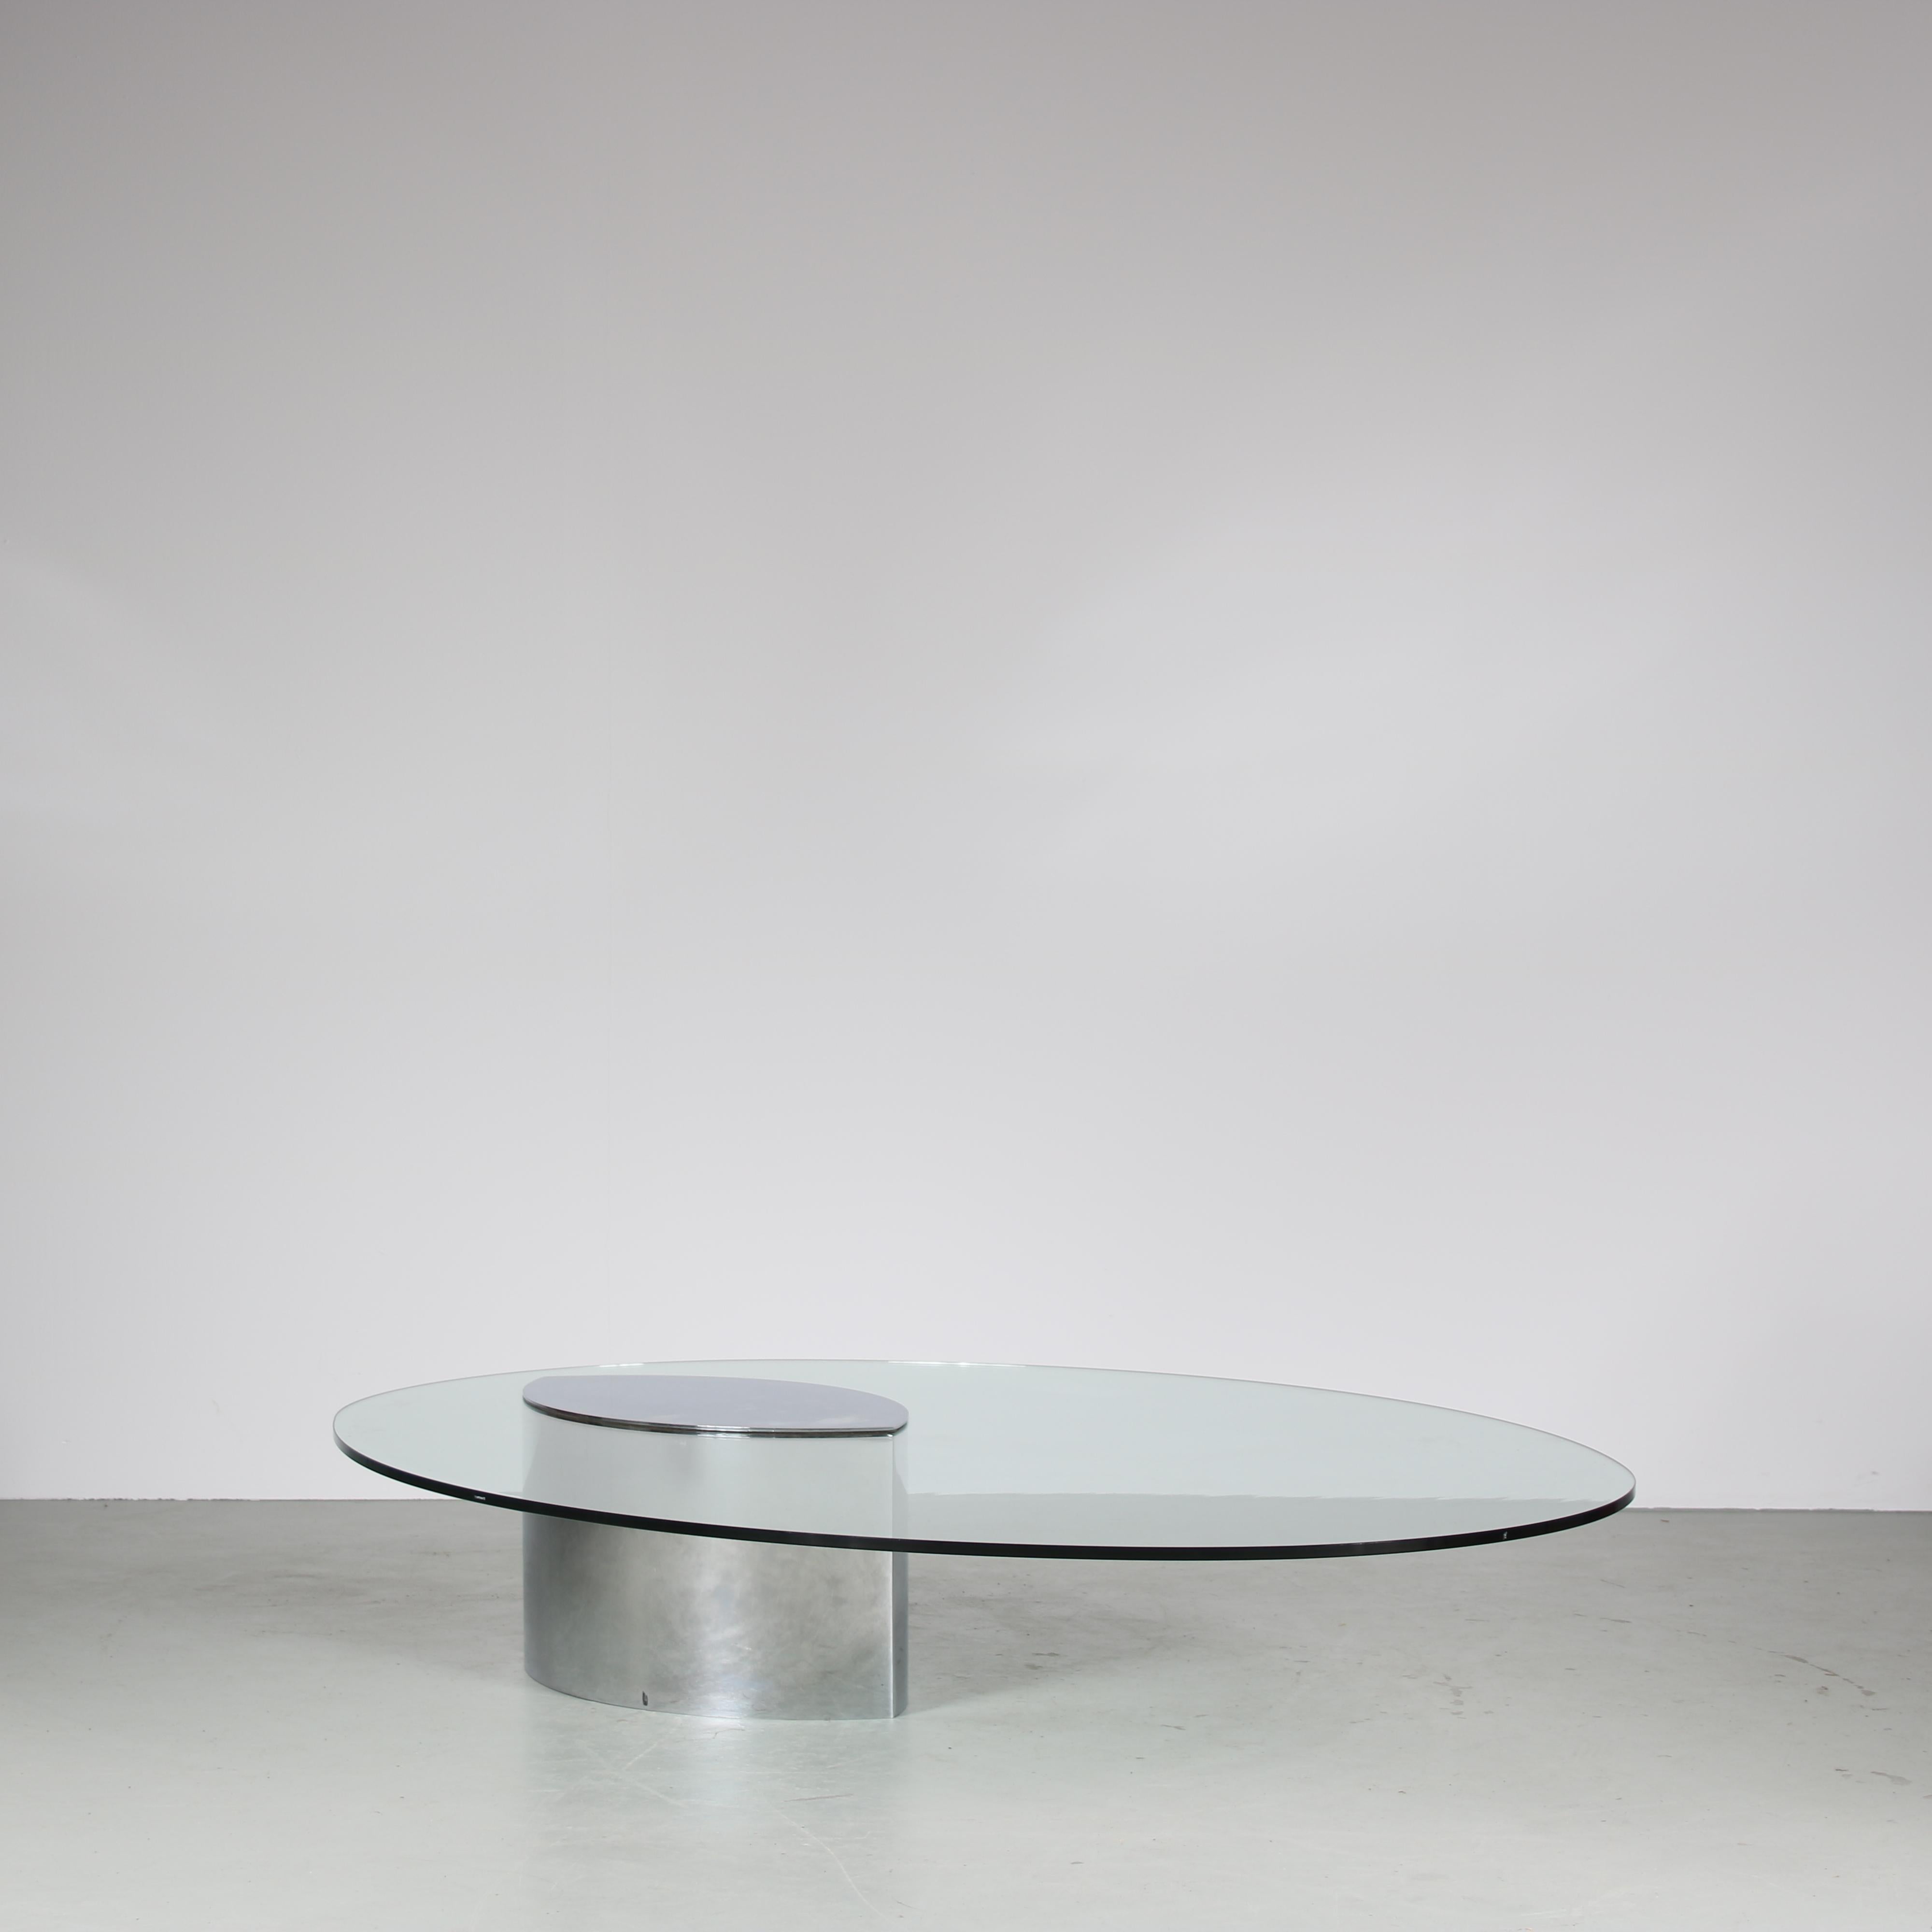 A beautiful coffee table, model “Lunario”, designed by Cini Boeri and manufactured by Gavina in Italy around 1970.

This outstanding piece has a stainless steel base with large, clear glass oval shaped top. This makes the piece a highly recognizable